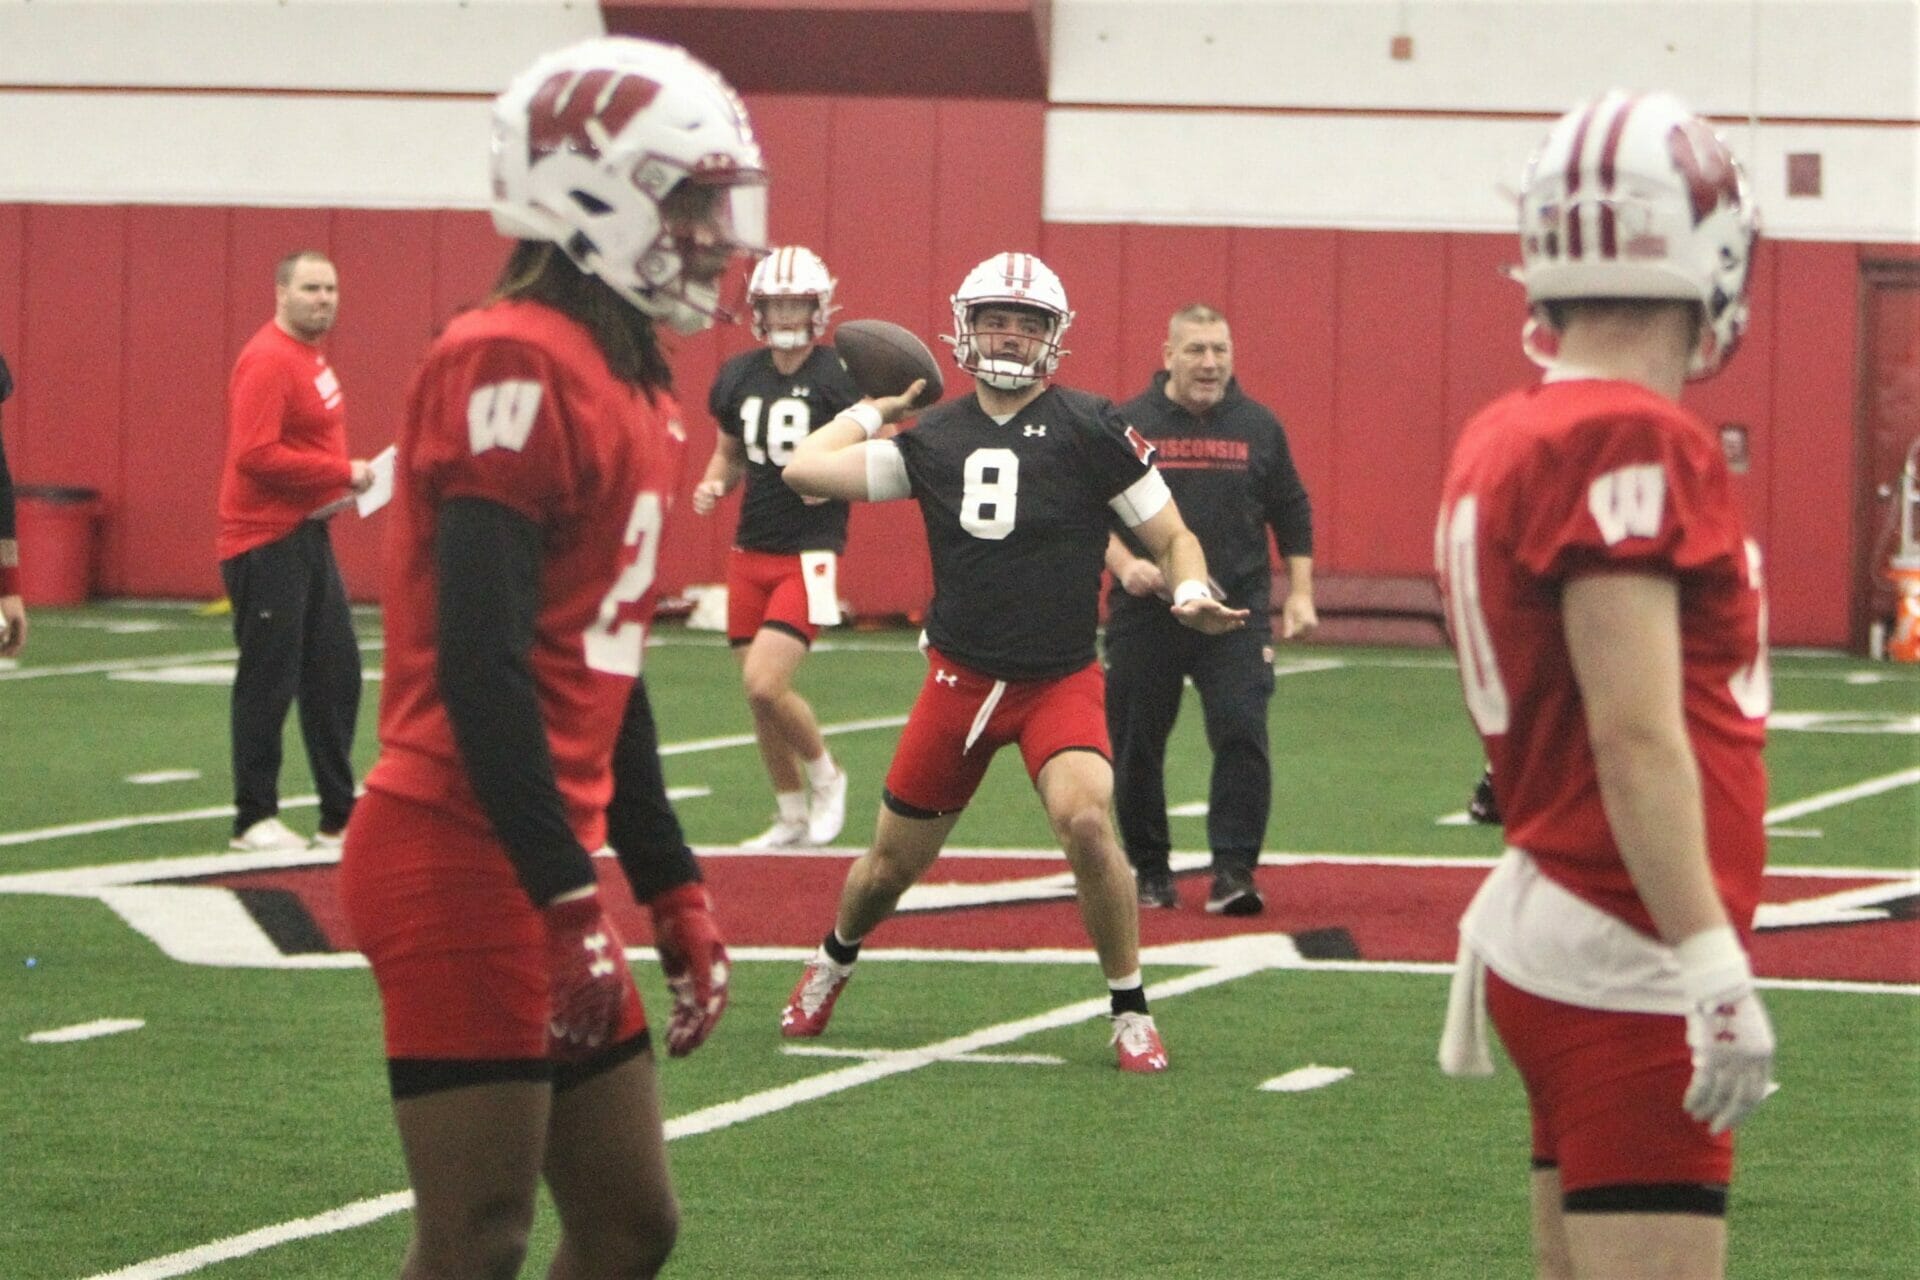 Wisconsin quarterback Tanner Mordecai throws a pass during first spring football practice of the season on Saturday March 25, 2023 at the McClain Center in Madison, Wis.Uw Football Spring Practice 9 March 25 2023 (Wisconsin Football)